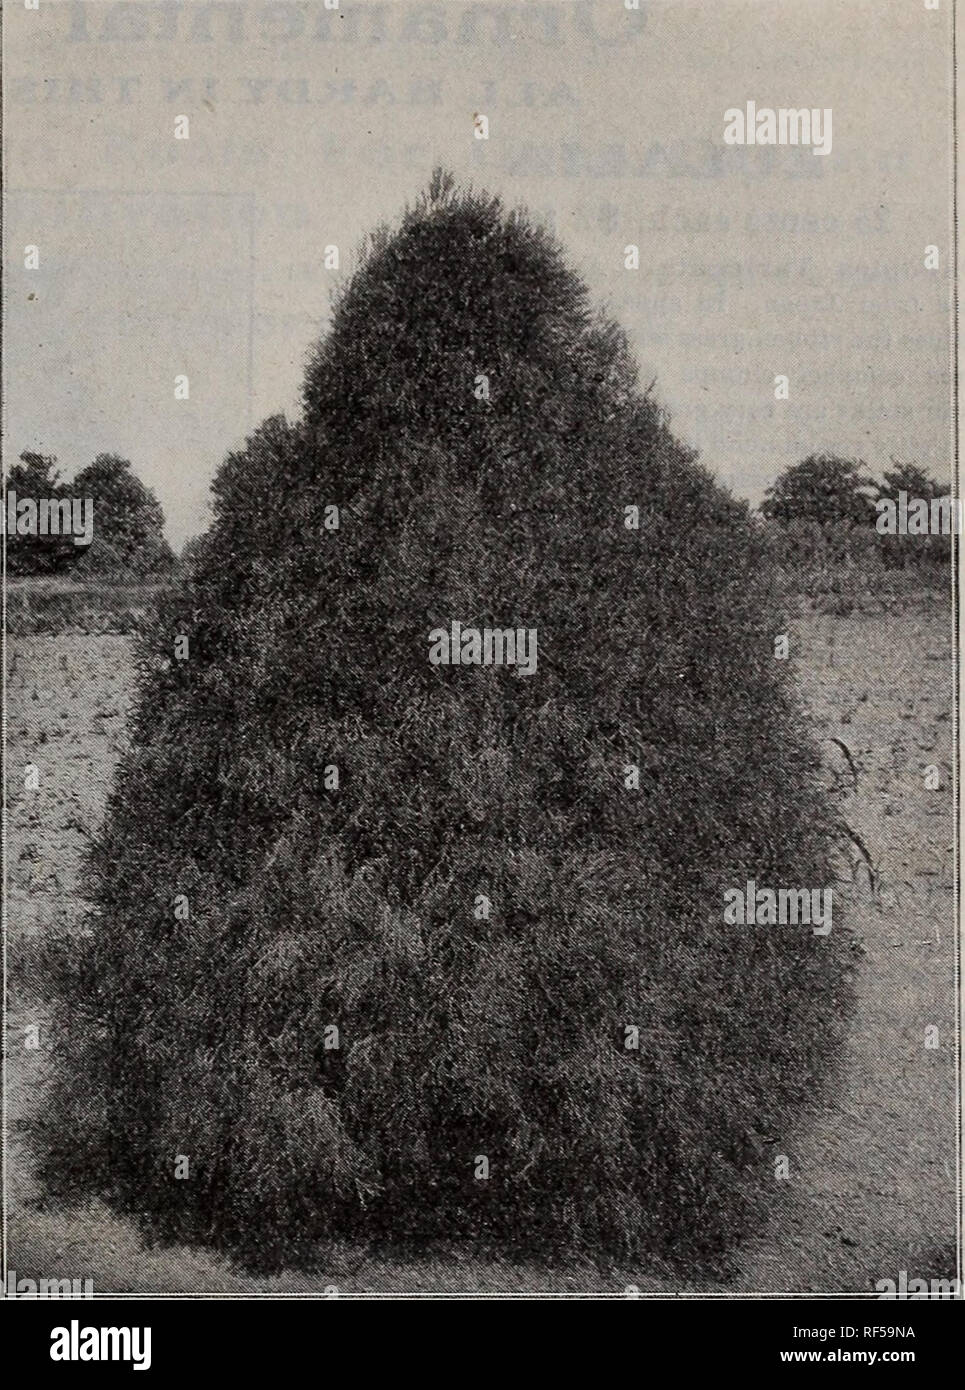 . Fruitland Nurseries. Nursery stock, Georgia, Augusta, Catalogs; Fruit trees, Seedlings, Catalogs; Fruit, Catalogs; Trees, Seedlings, Catalogs; Plants, Ornamental, Catalogs; Shrubs, Catalogs; Flowers, Catalogs. ORNAMENTAL DEPARTMENTâConiferous Evergreens 35 JUNIPERUS (TKe Jtii^ipex&quot; Tx*ee) Communis Hibernica (Irish). Of fine pyra- Toiidal growth. Ultimate height. 8 to 10 feet. 25 cents each, Â§2 for 10; 24to36 inches, 50 cents each, $4 for 10; 4 to 5 feet, Â§leach. Commtmis Suecica (Swedish). Yellowish cast. Ultimate height, 10 feet. 25 and 50 cents. Japonica (Japanese Juniper). Bright g Stock Photo